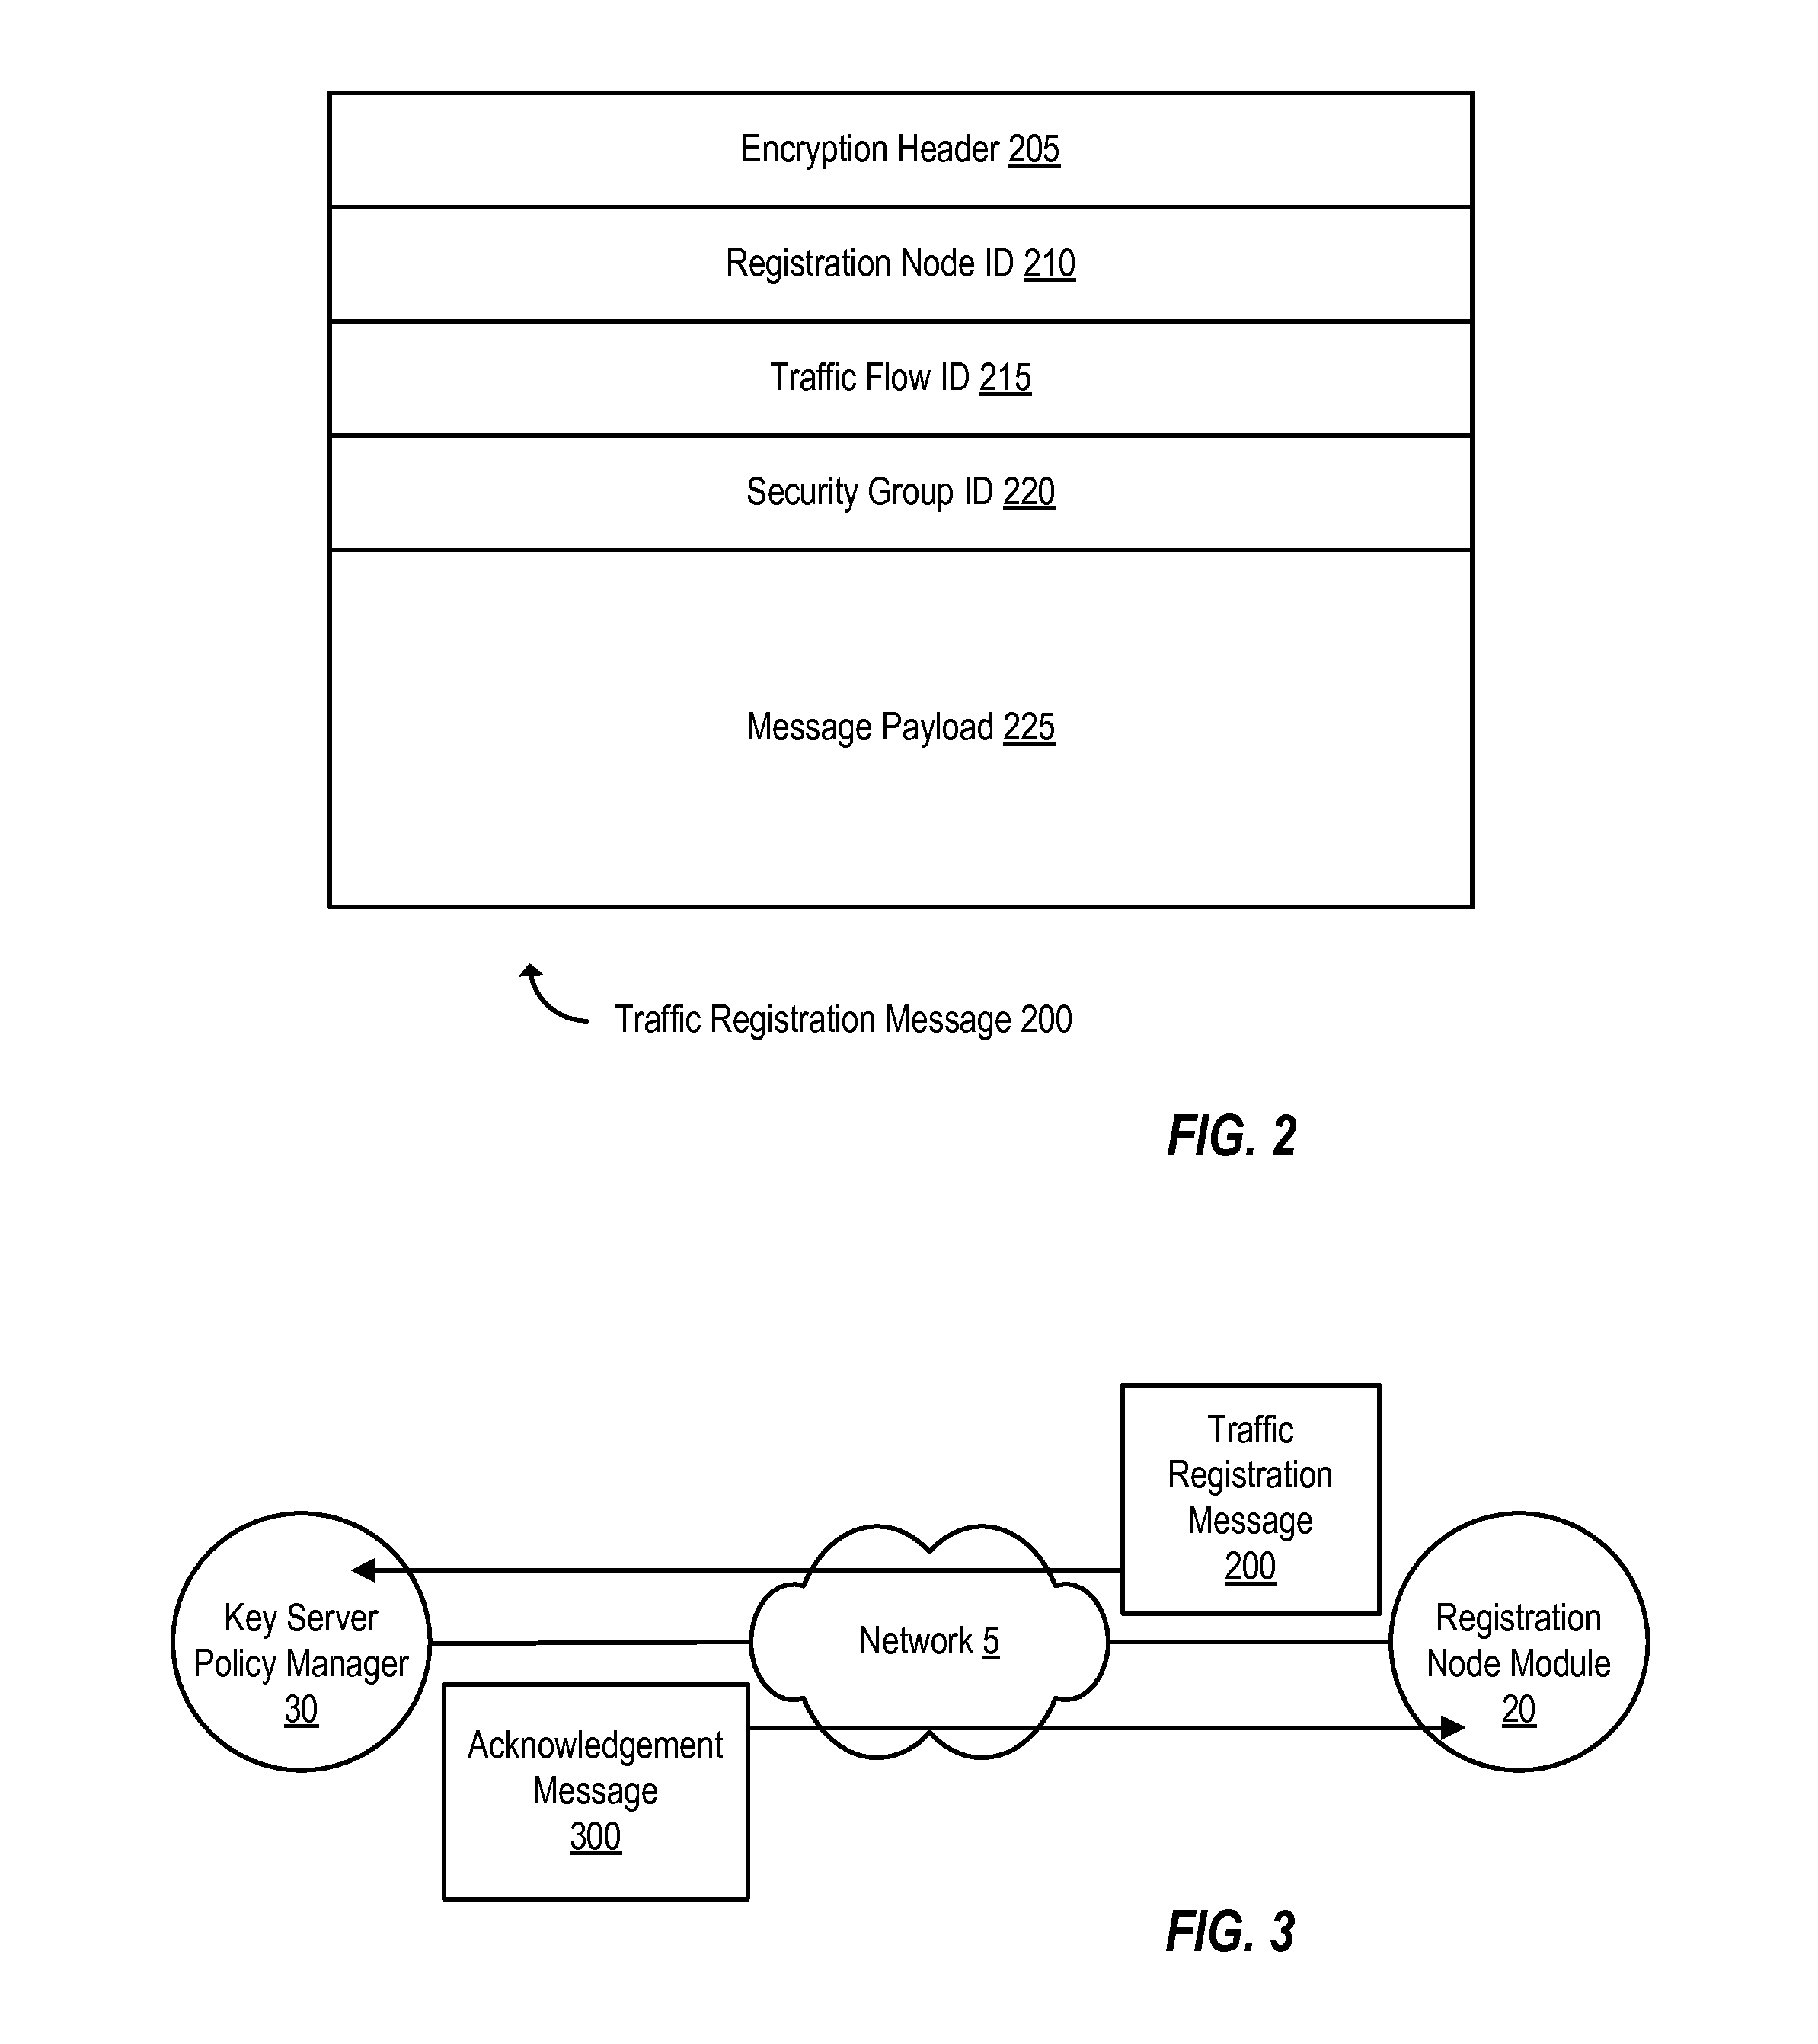 Dynamic group creation and traffic flow registration under a group in a group key infrastructure